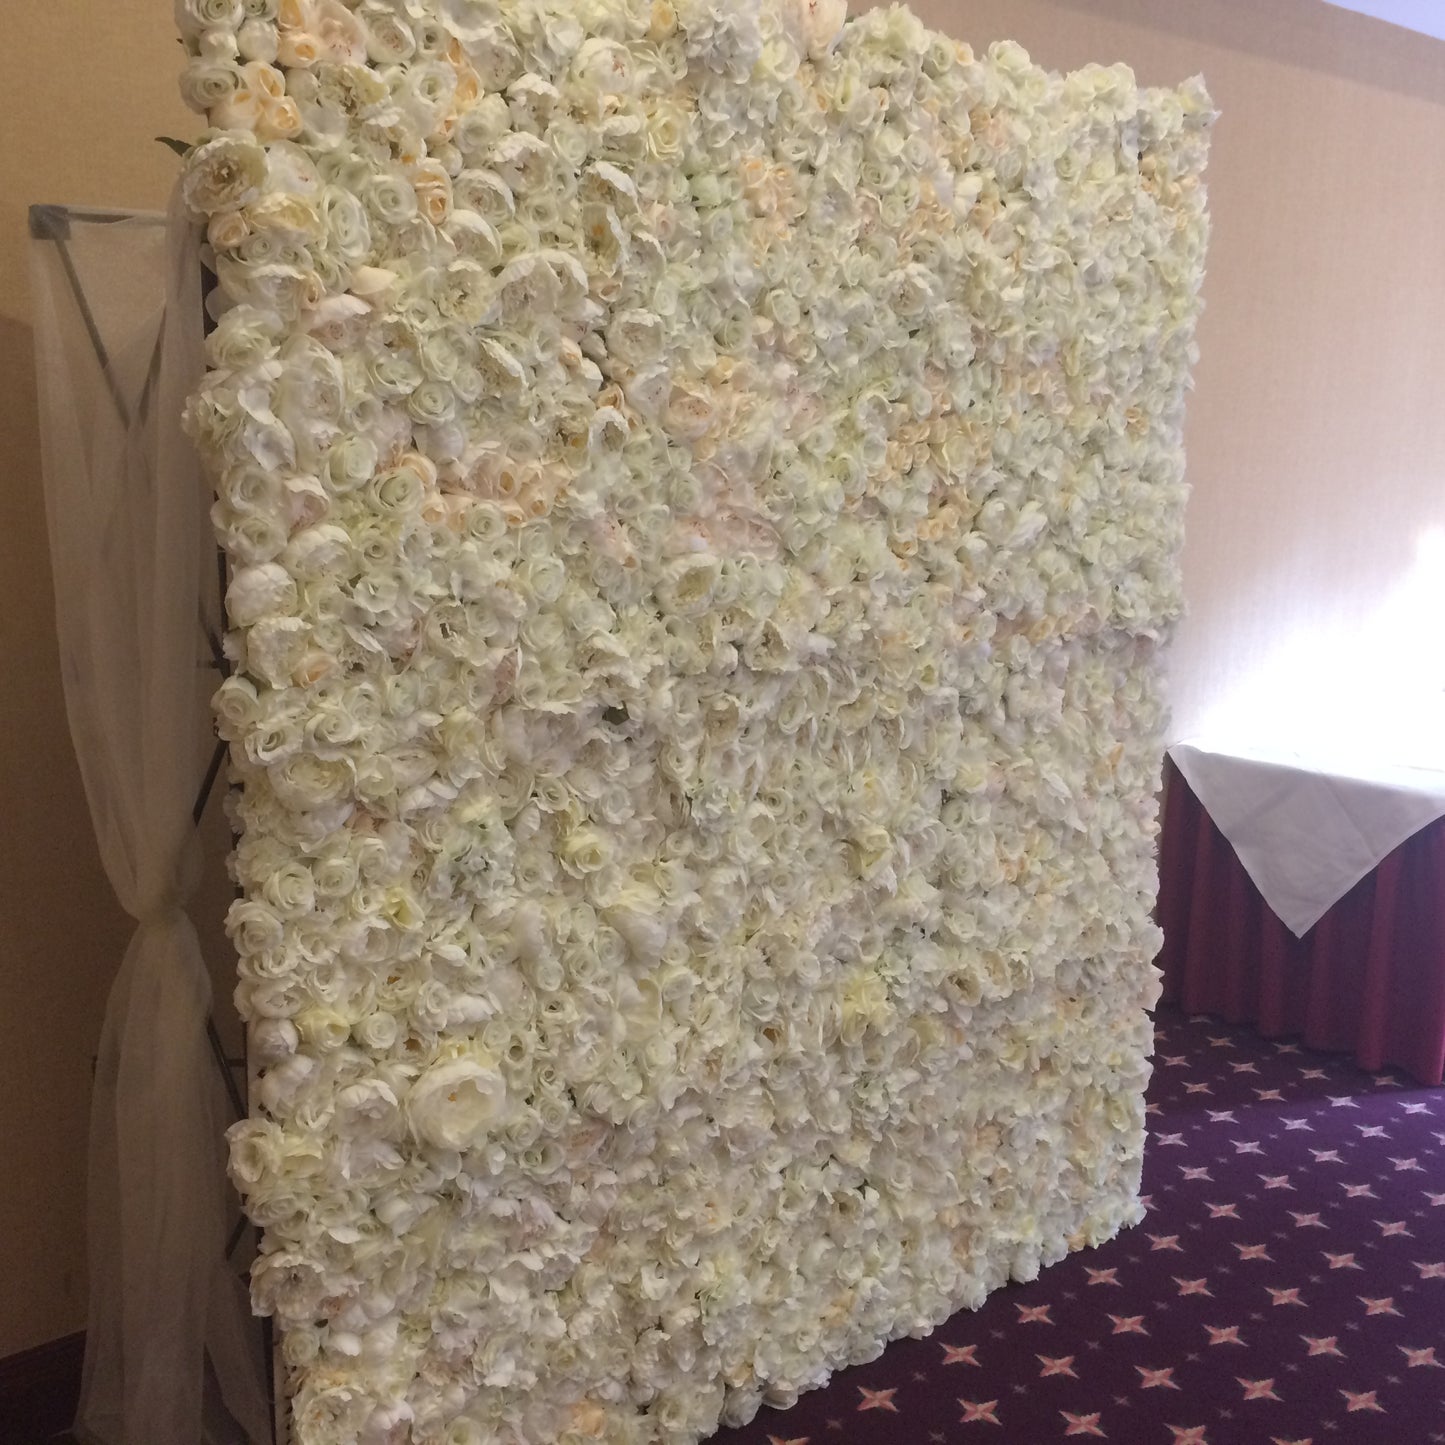 Flower wall hire